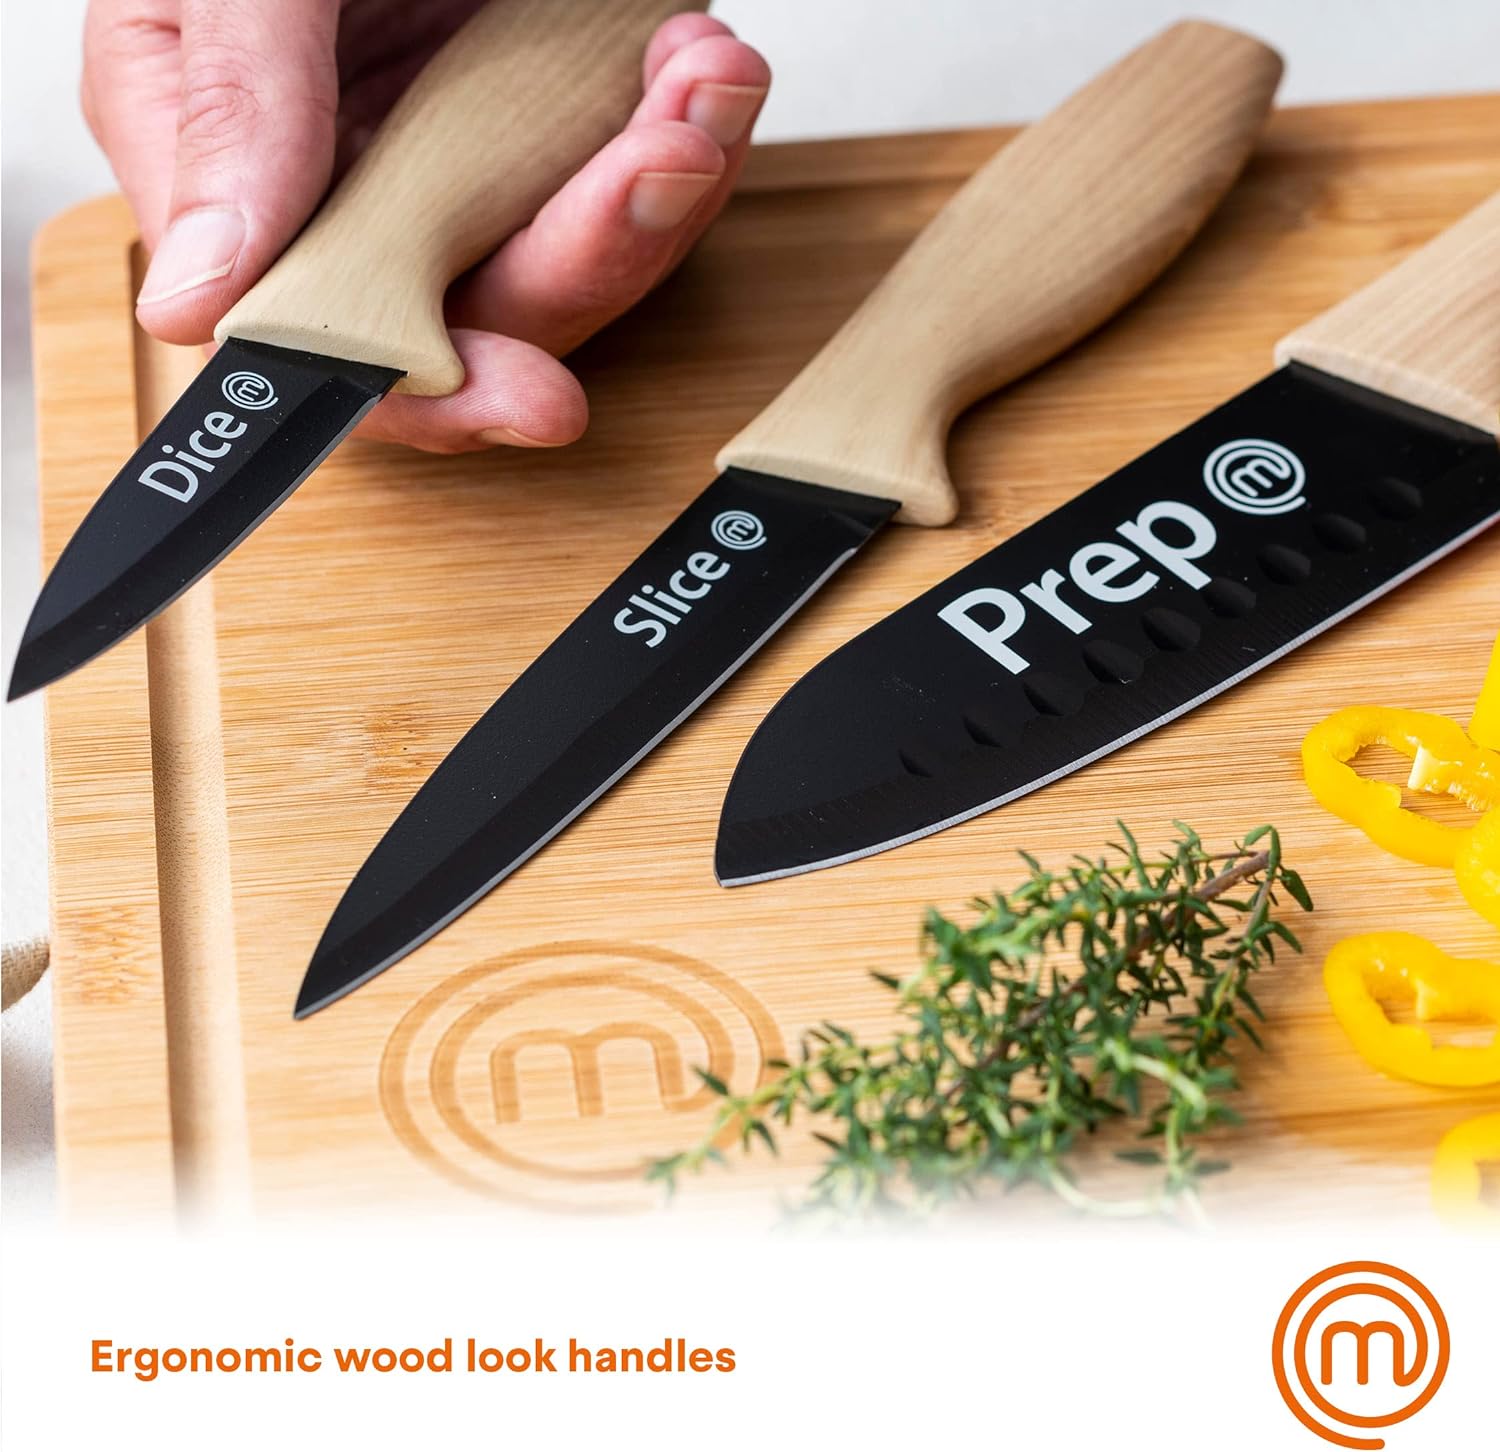 MasterChef Knife Set of 3 Kitchen Knives for Cooking with Non Stick Blades & Soft Touch Handles